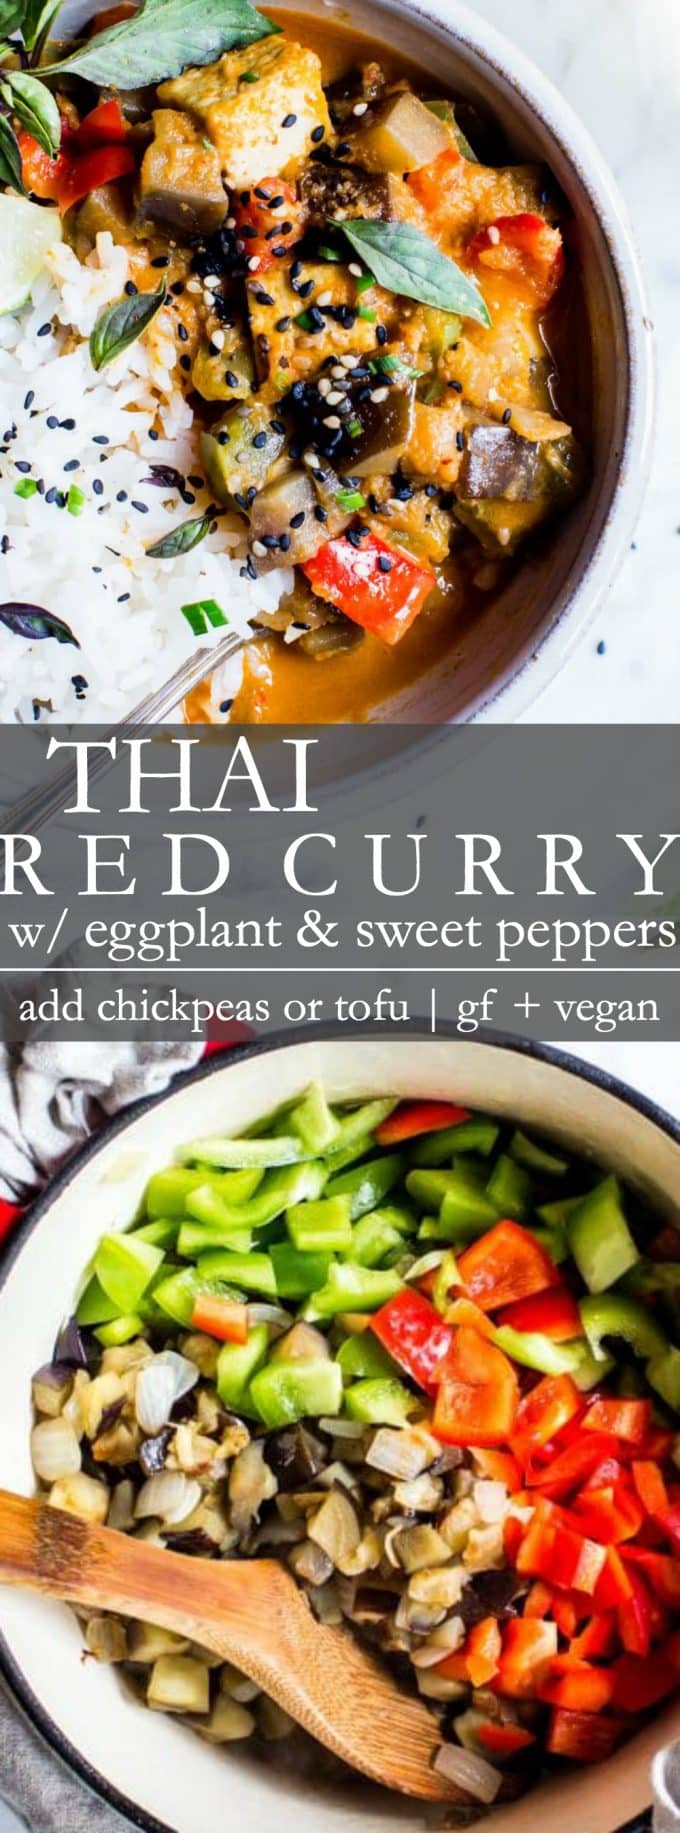 Thai Red Curry With Eggplant And Sweet Peppers Vanilla And Bean,Huancaina Sauce Calories